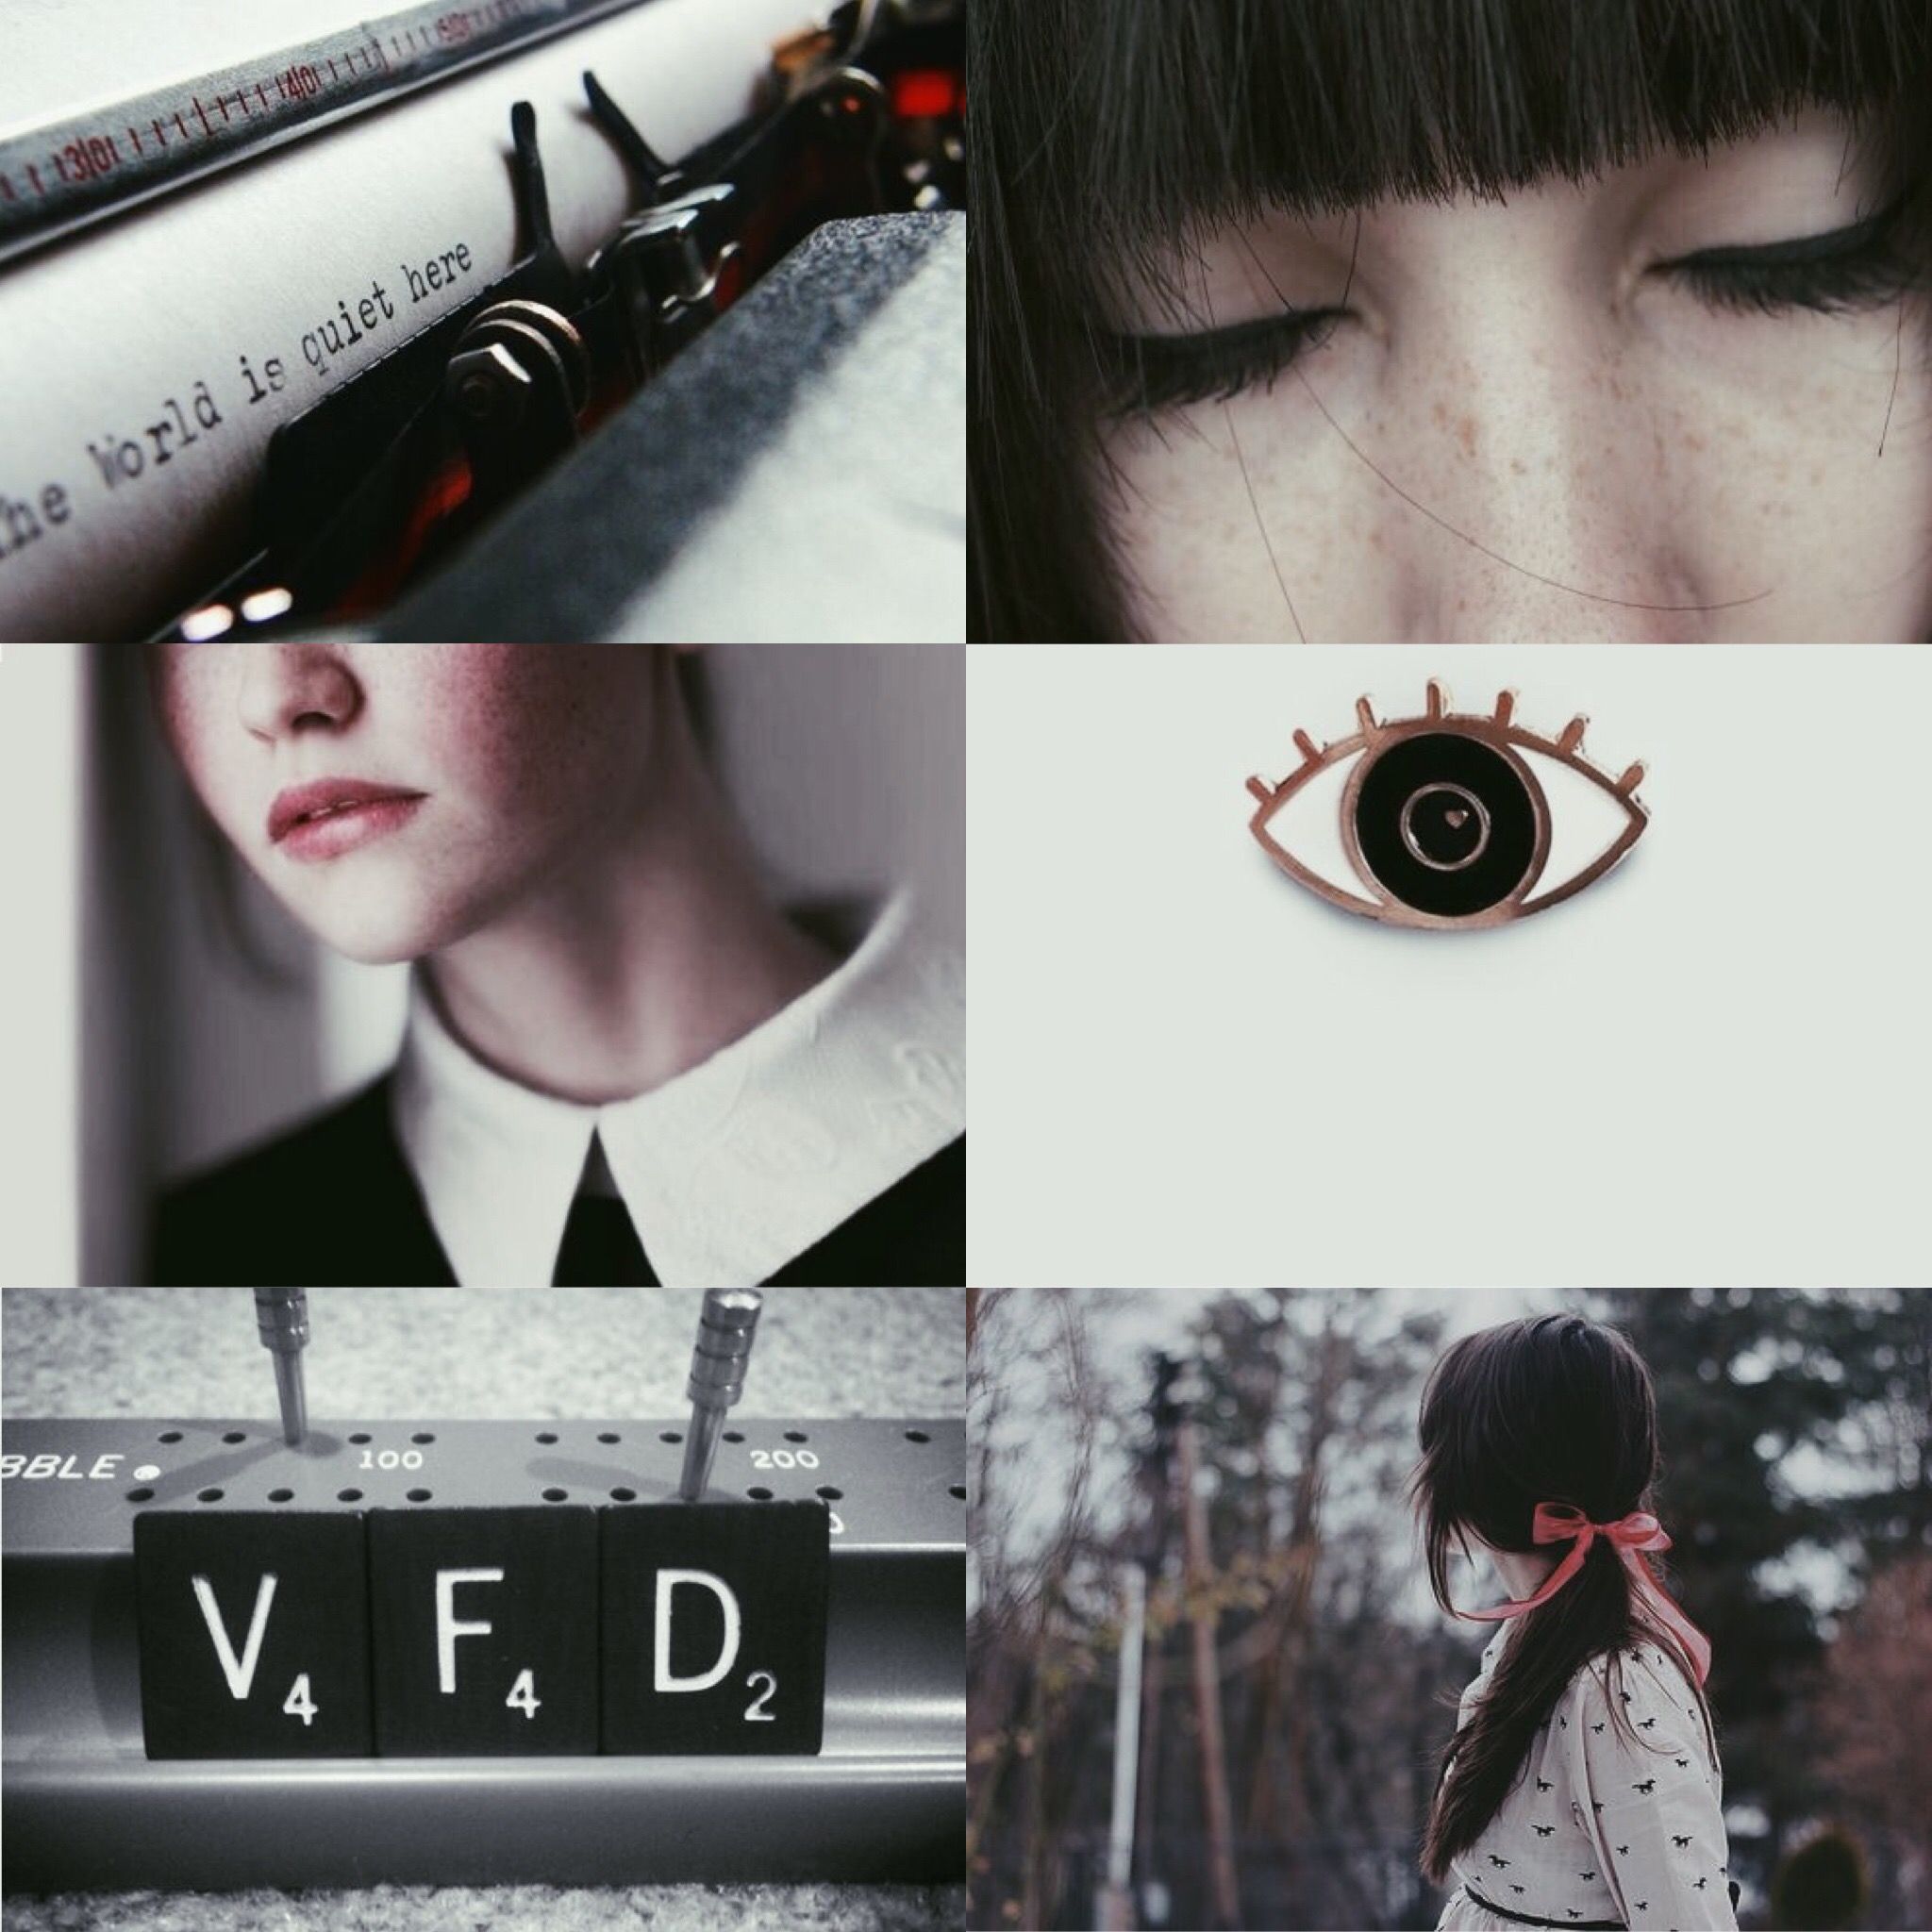 Violet Baudelaire Aesthetic. A series of unfortunate events, Character aesthetic, Aesthetic